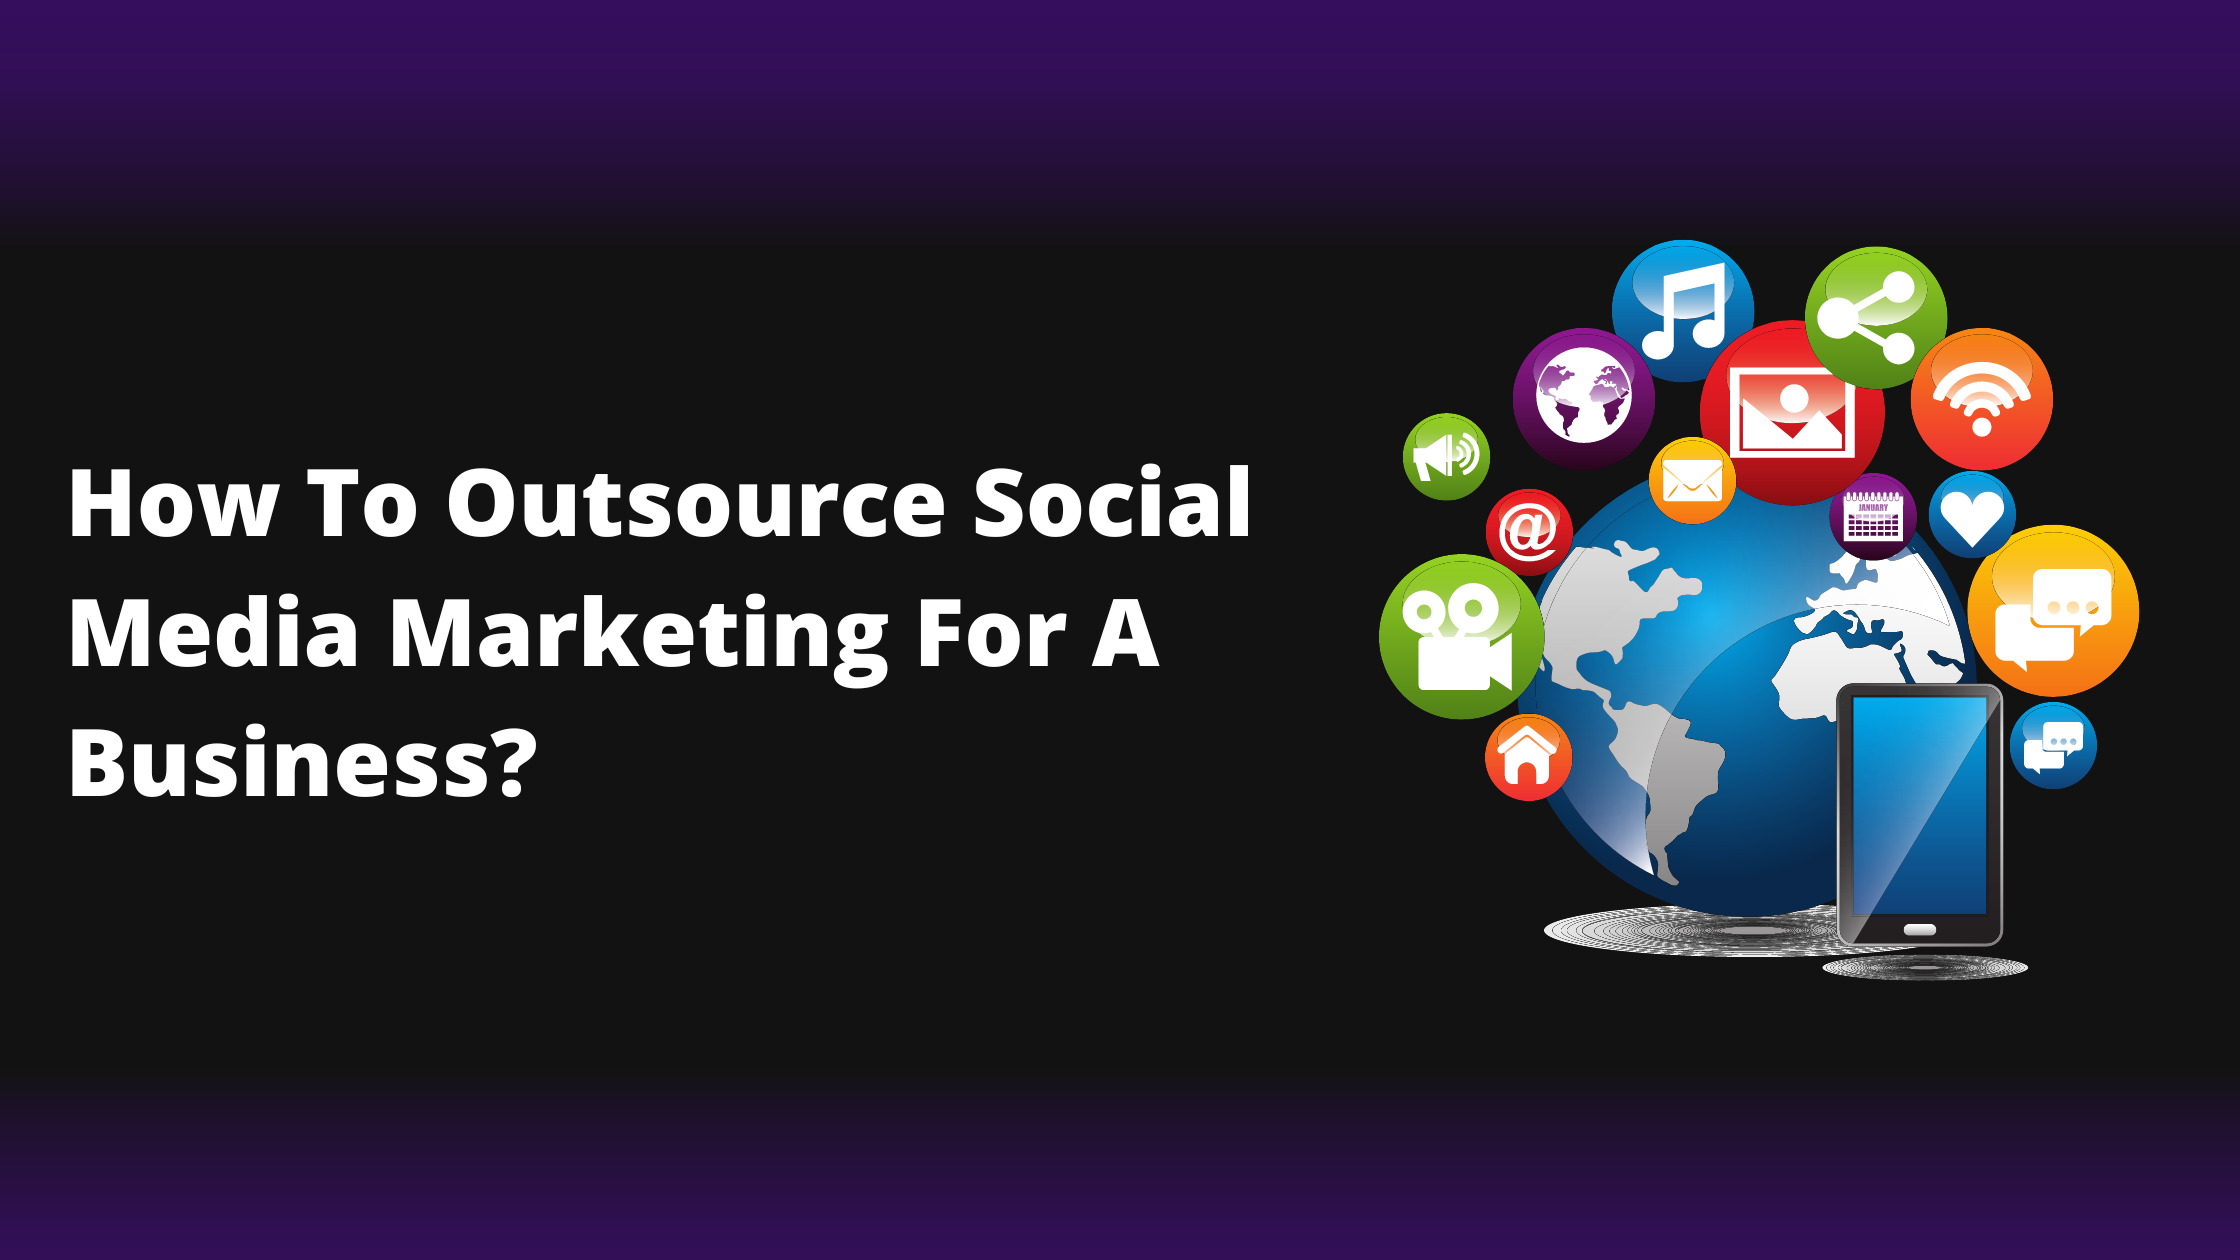 How to outsource social media marketing for a business?